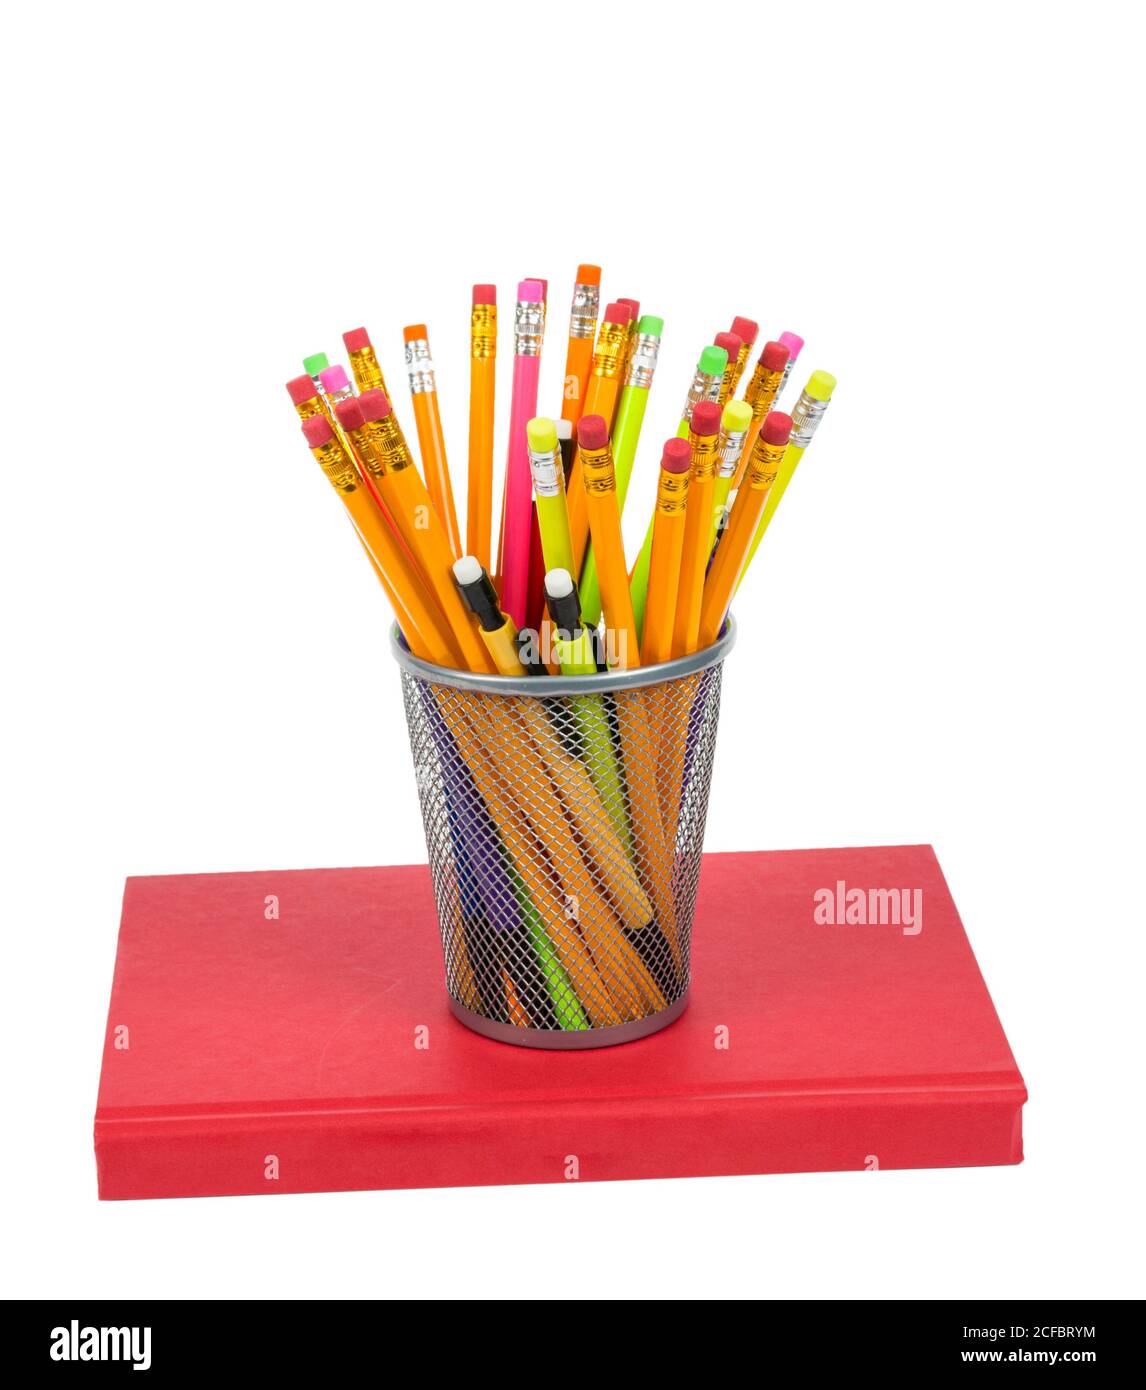 Isolated on white shot of a bunch of colorful pencils in a holder resting on a red book. Stock Photo